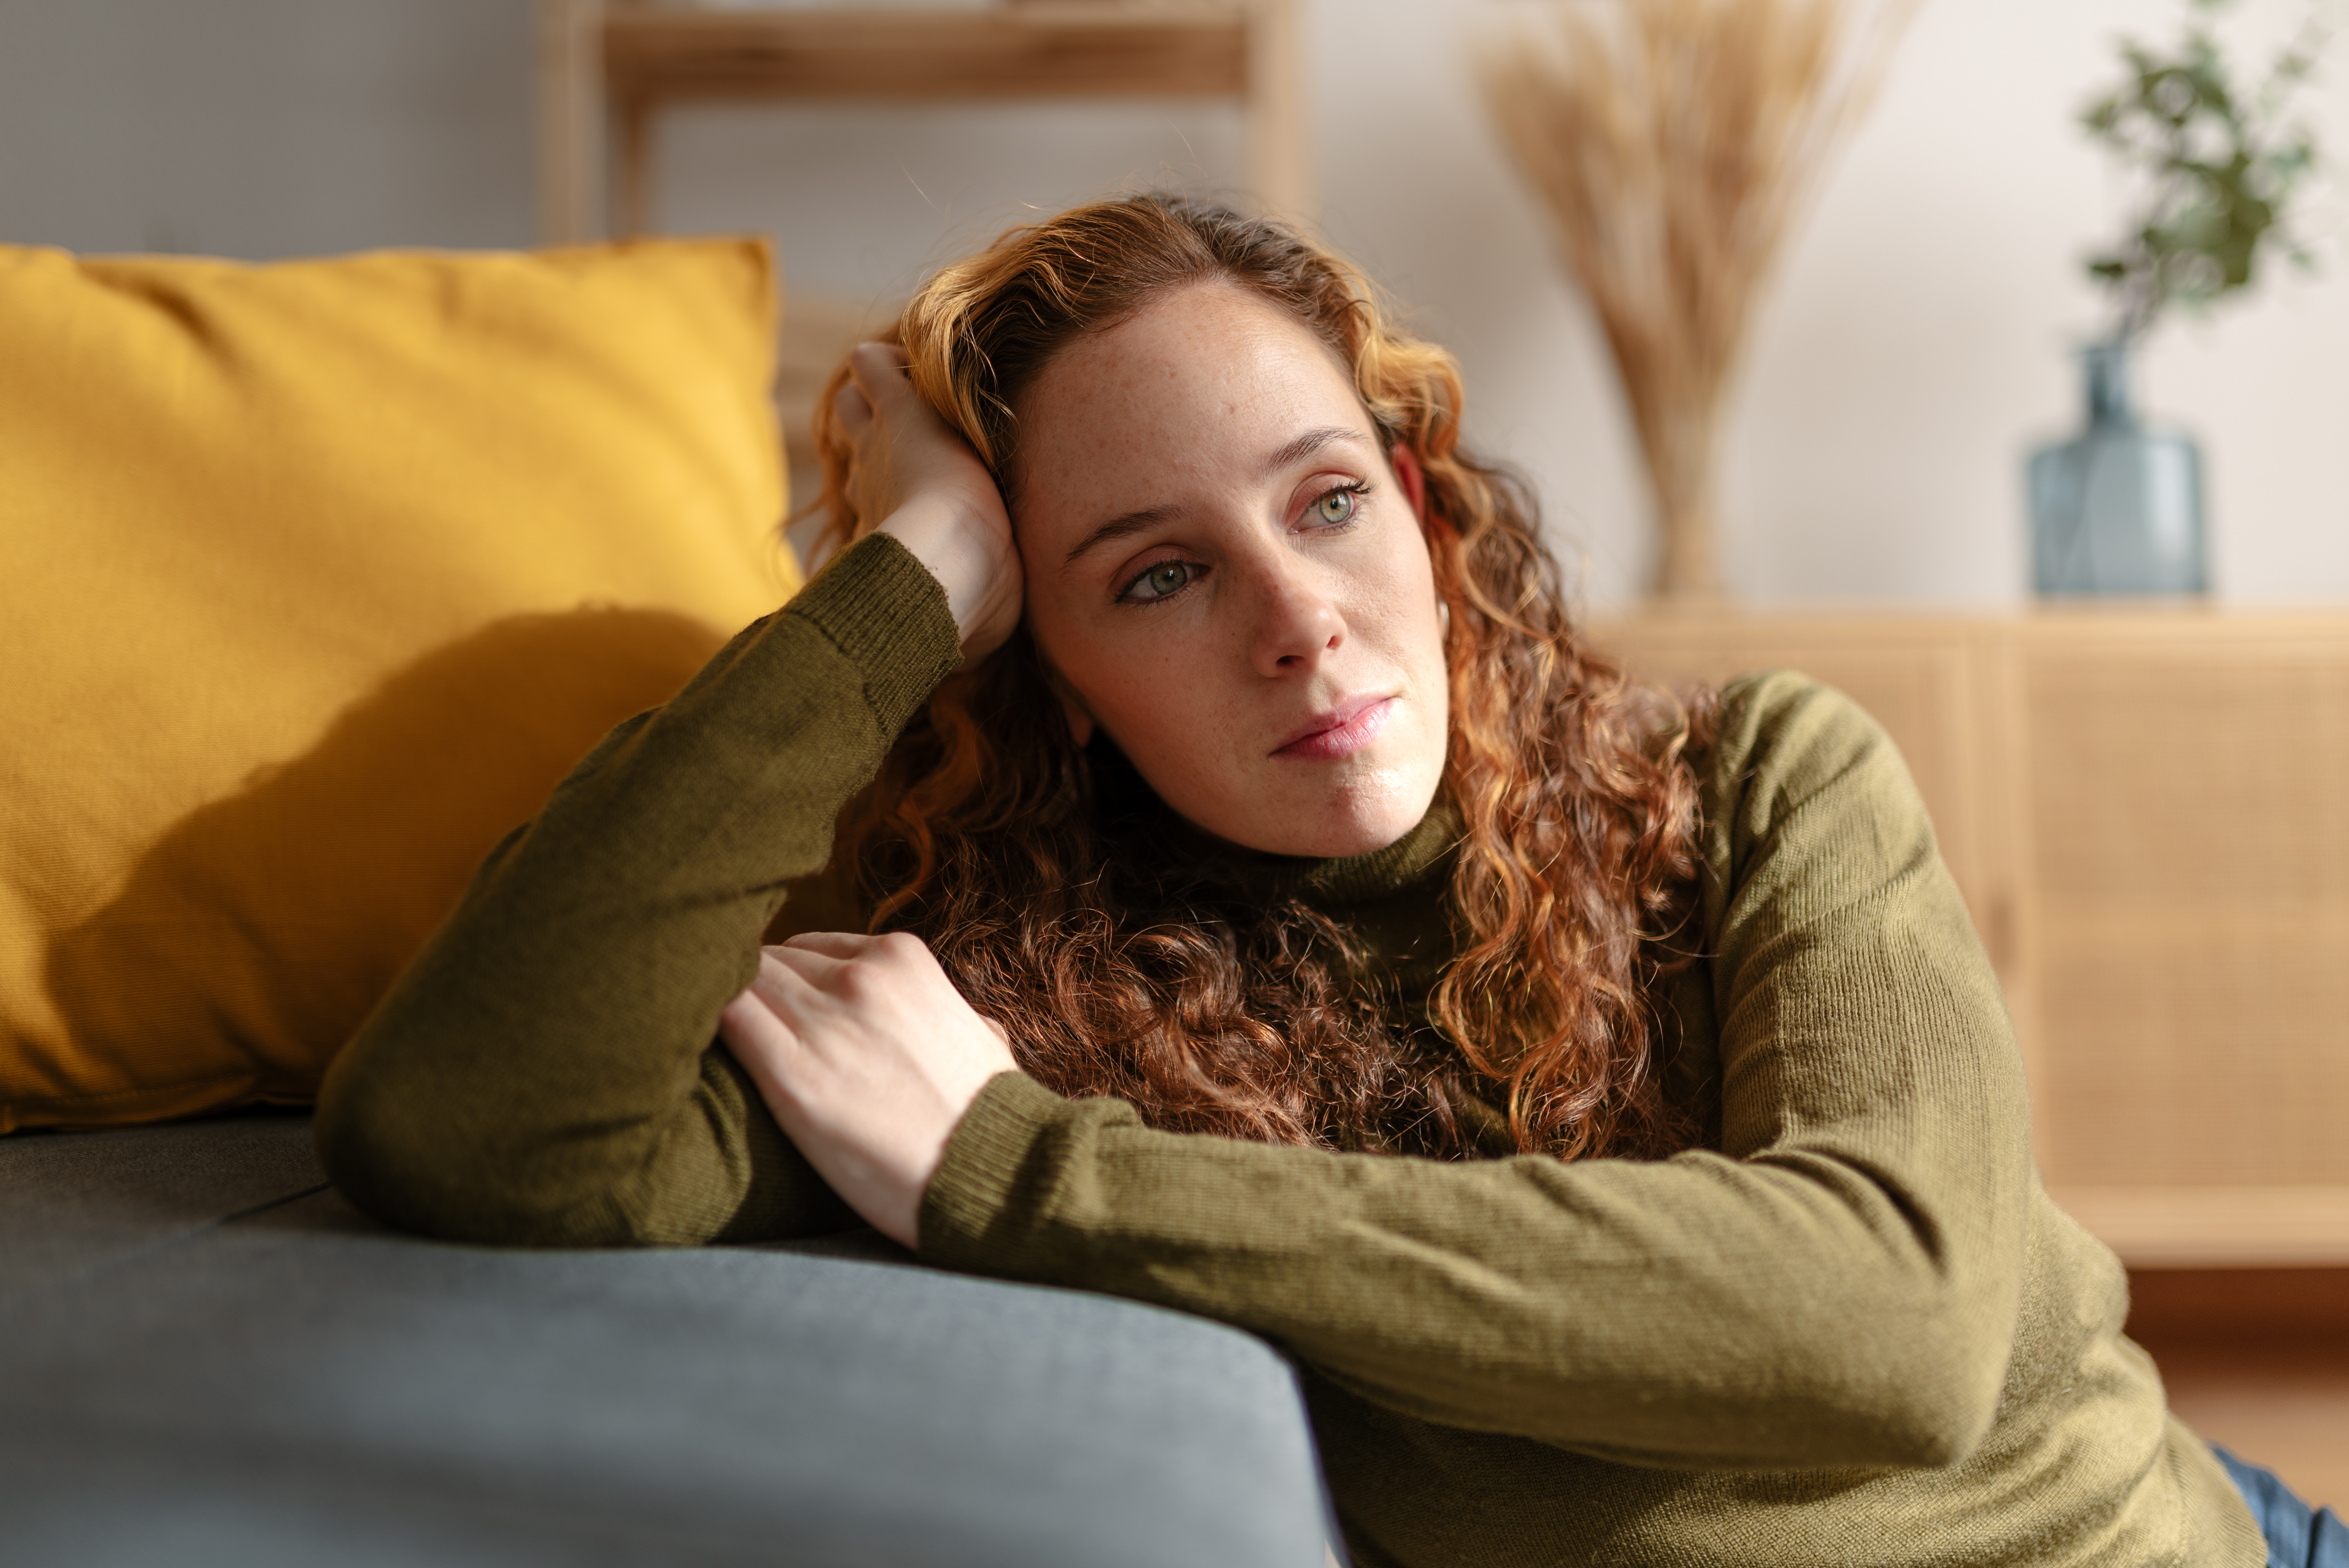 Portrait of a young woman with long curly red hair sitting on the floor and leaning on a sofa, looking away with sad face. Moment of sadness and worry in the living room of her house. | Source: Getty Images